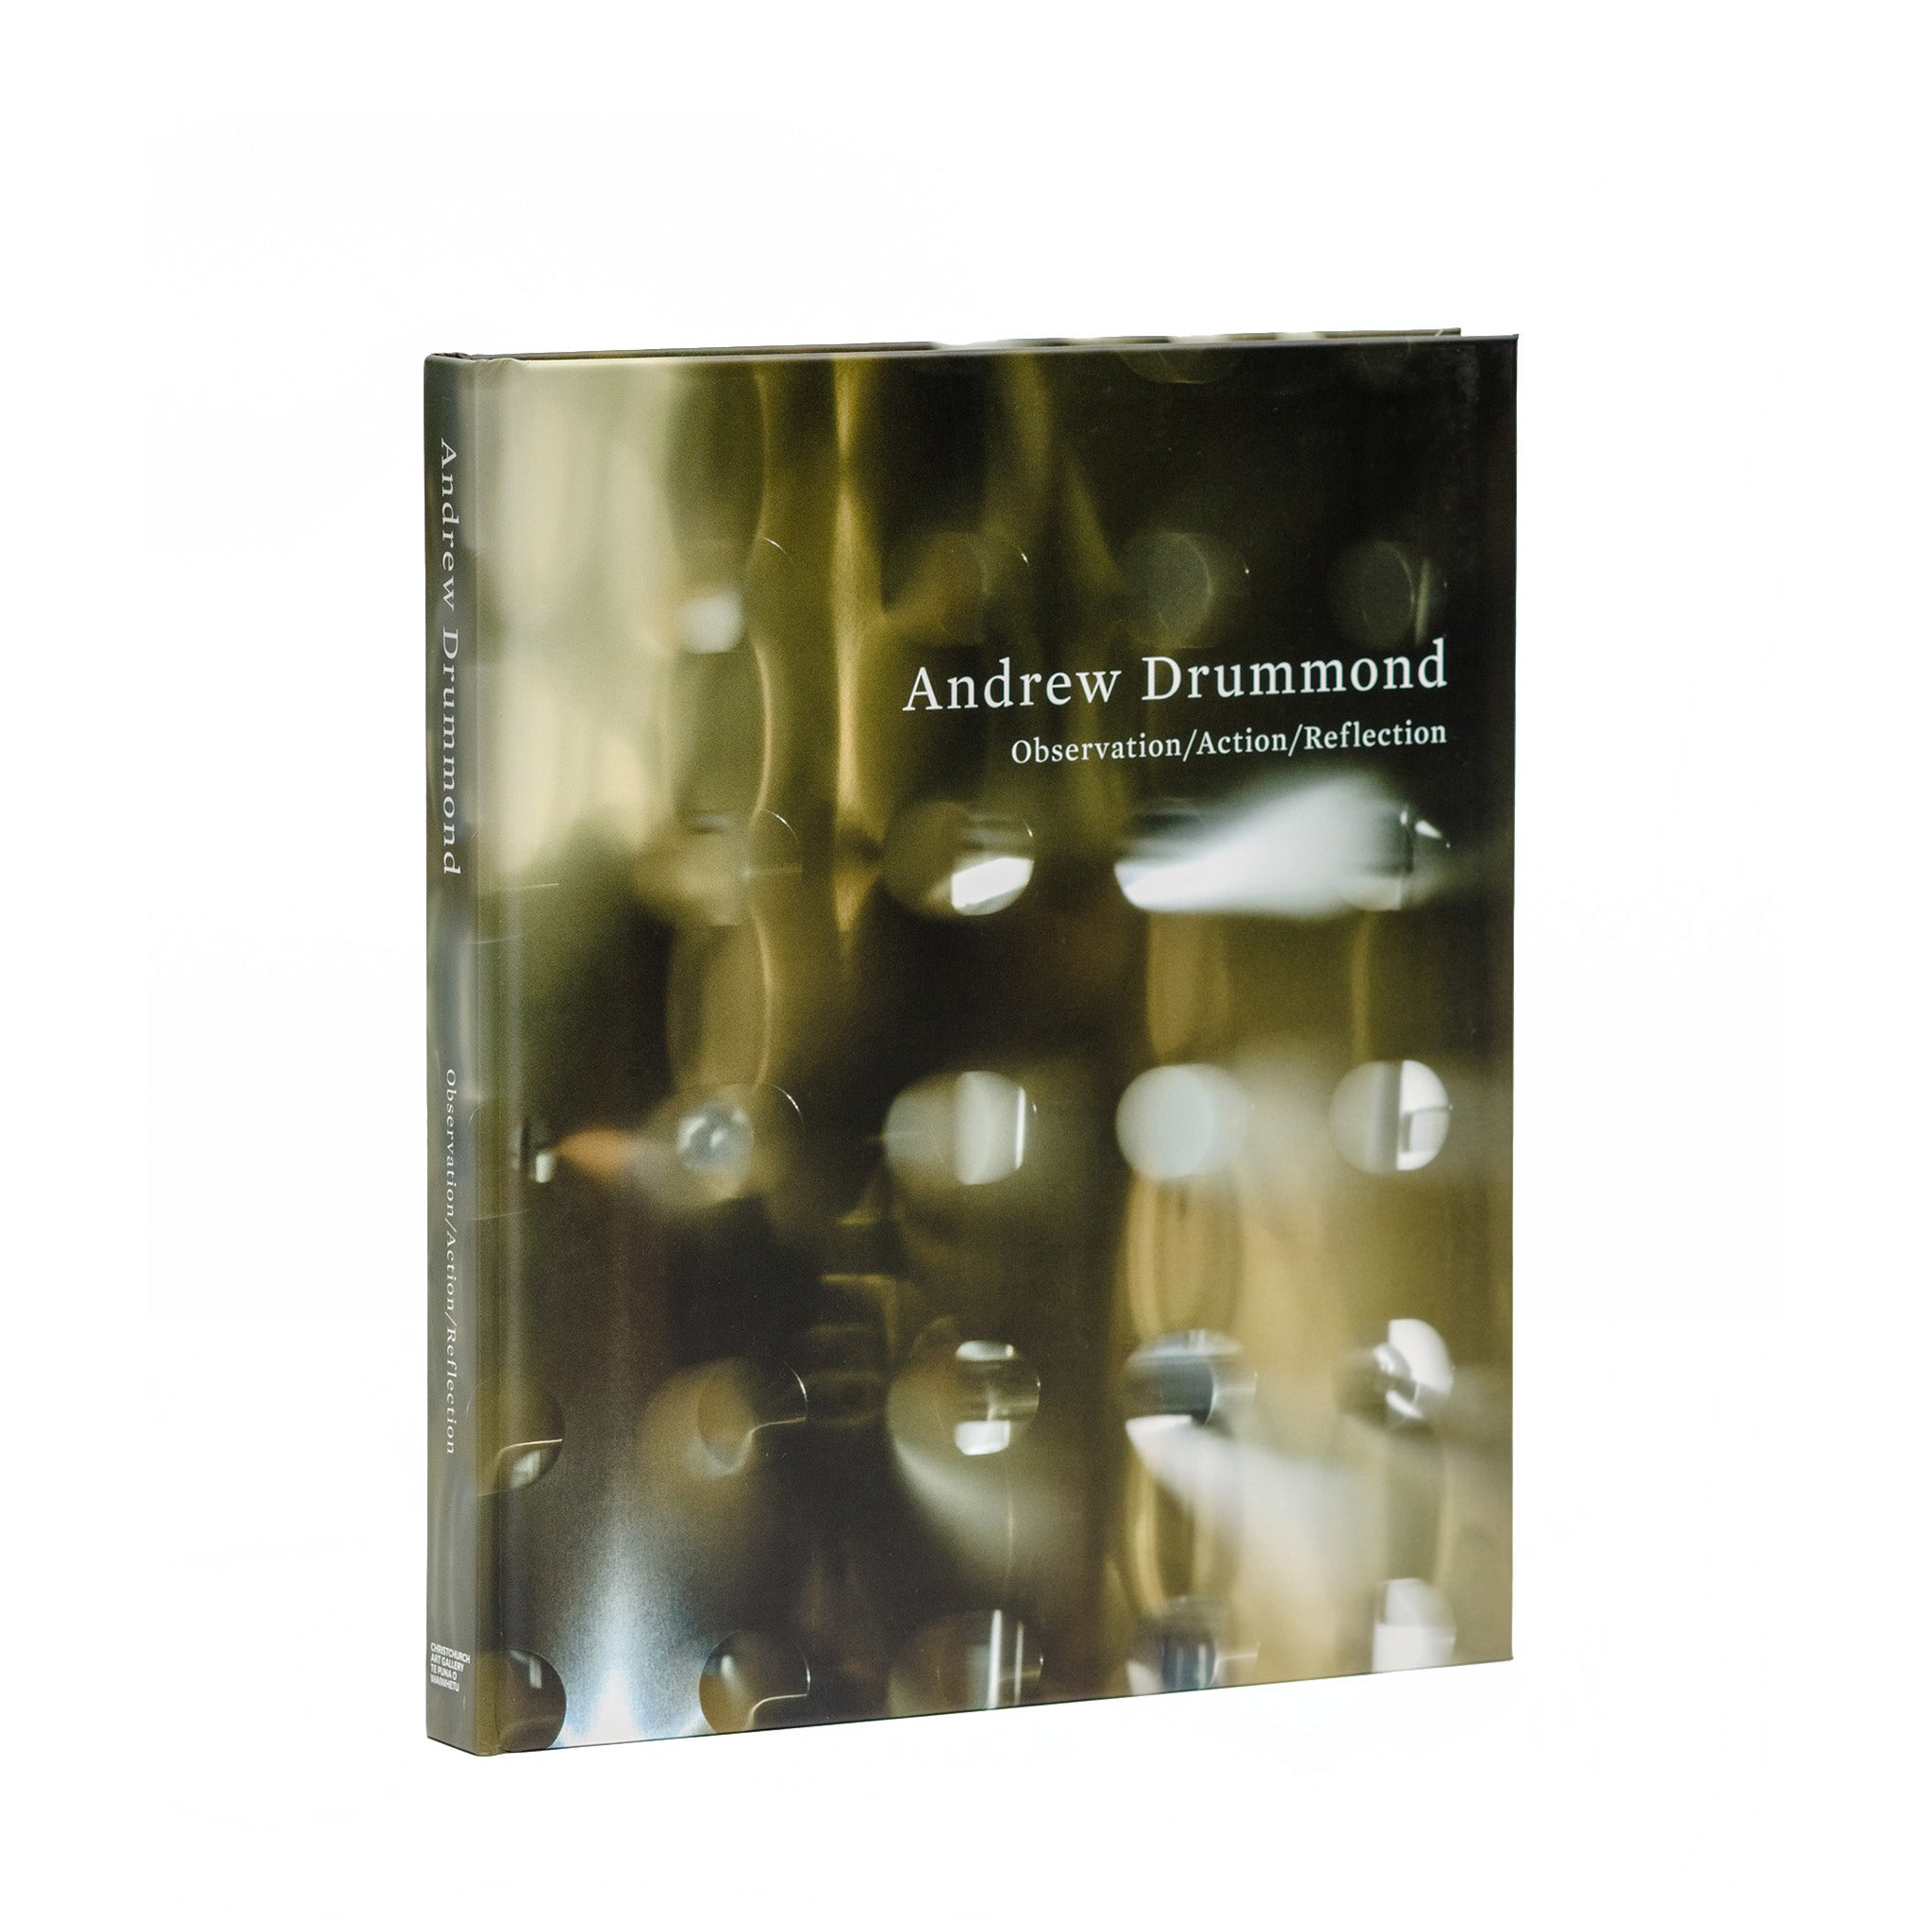 Andrew Drummond: Observation / Action / Reflection